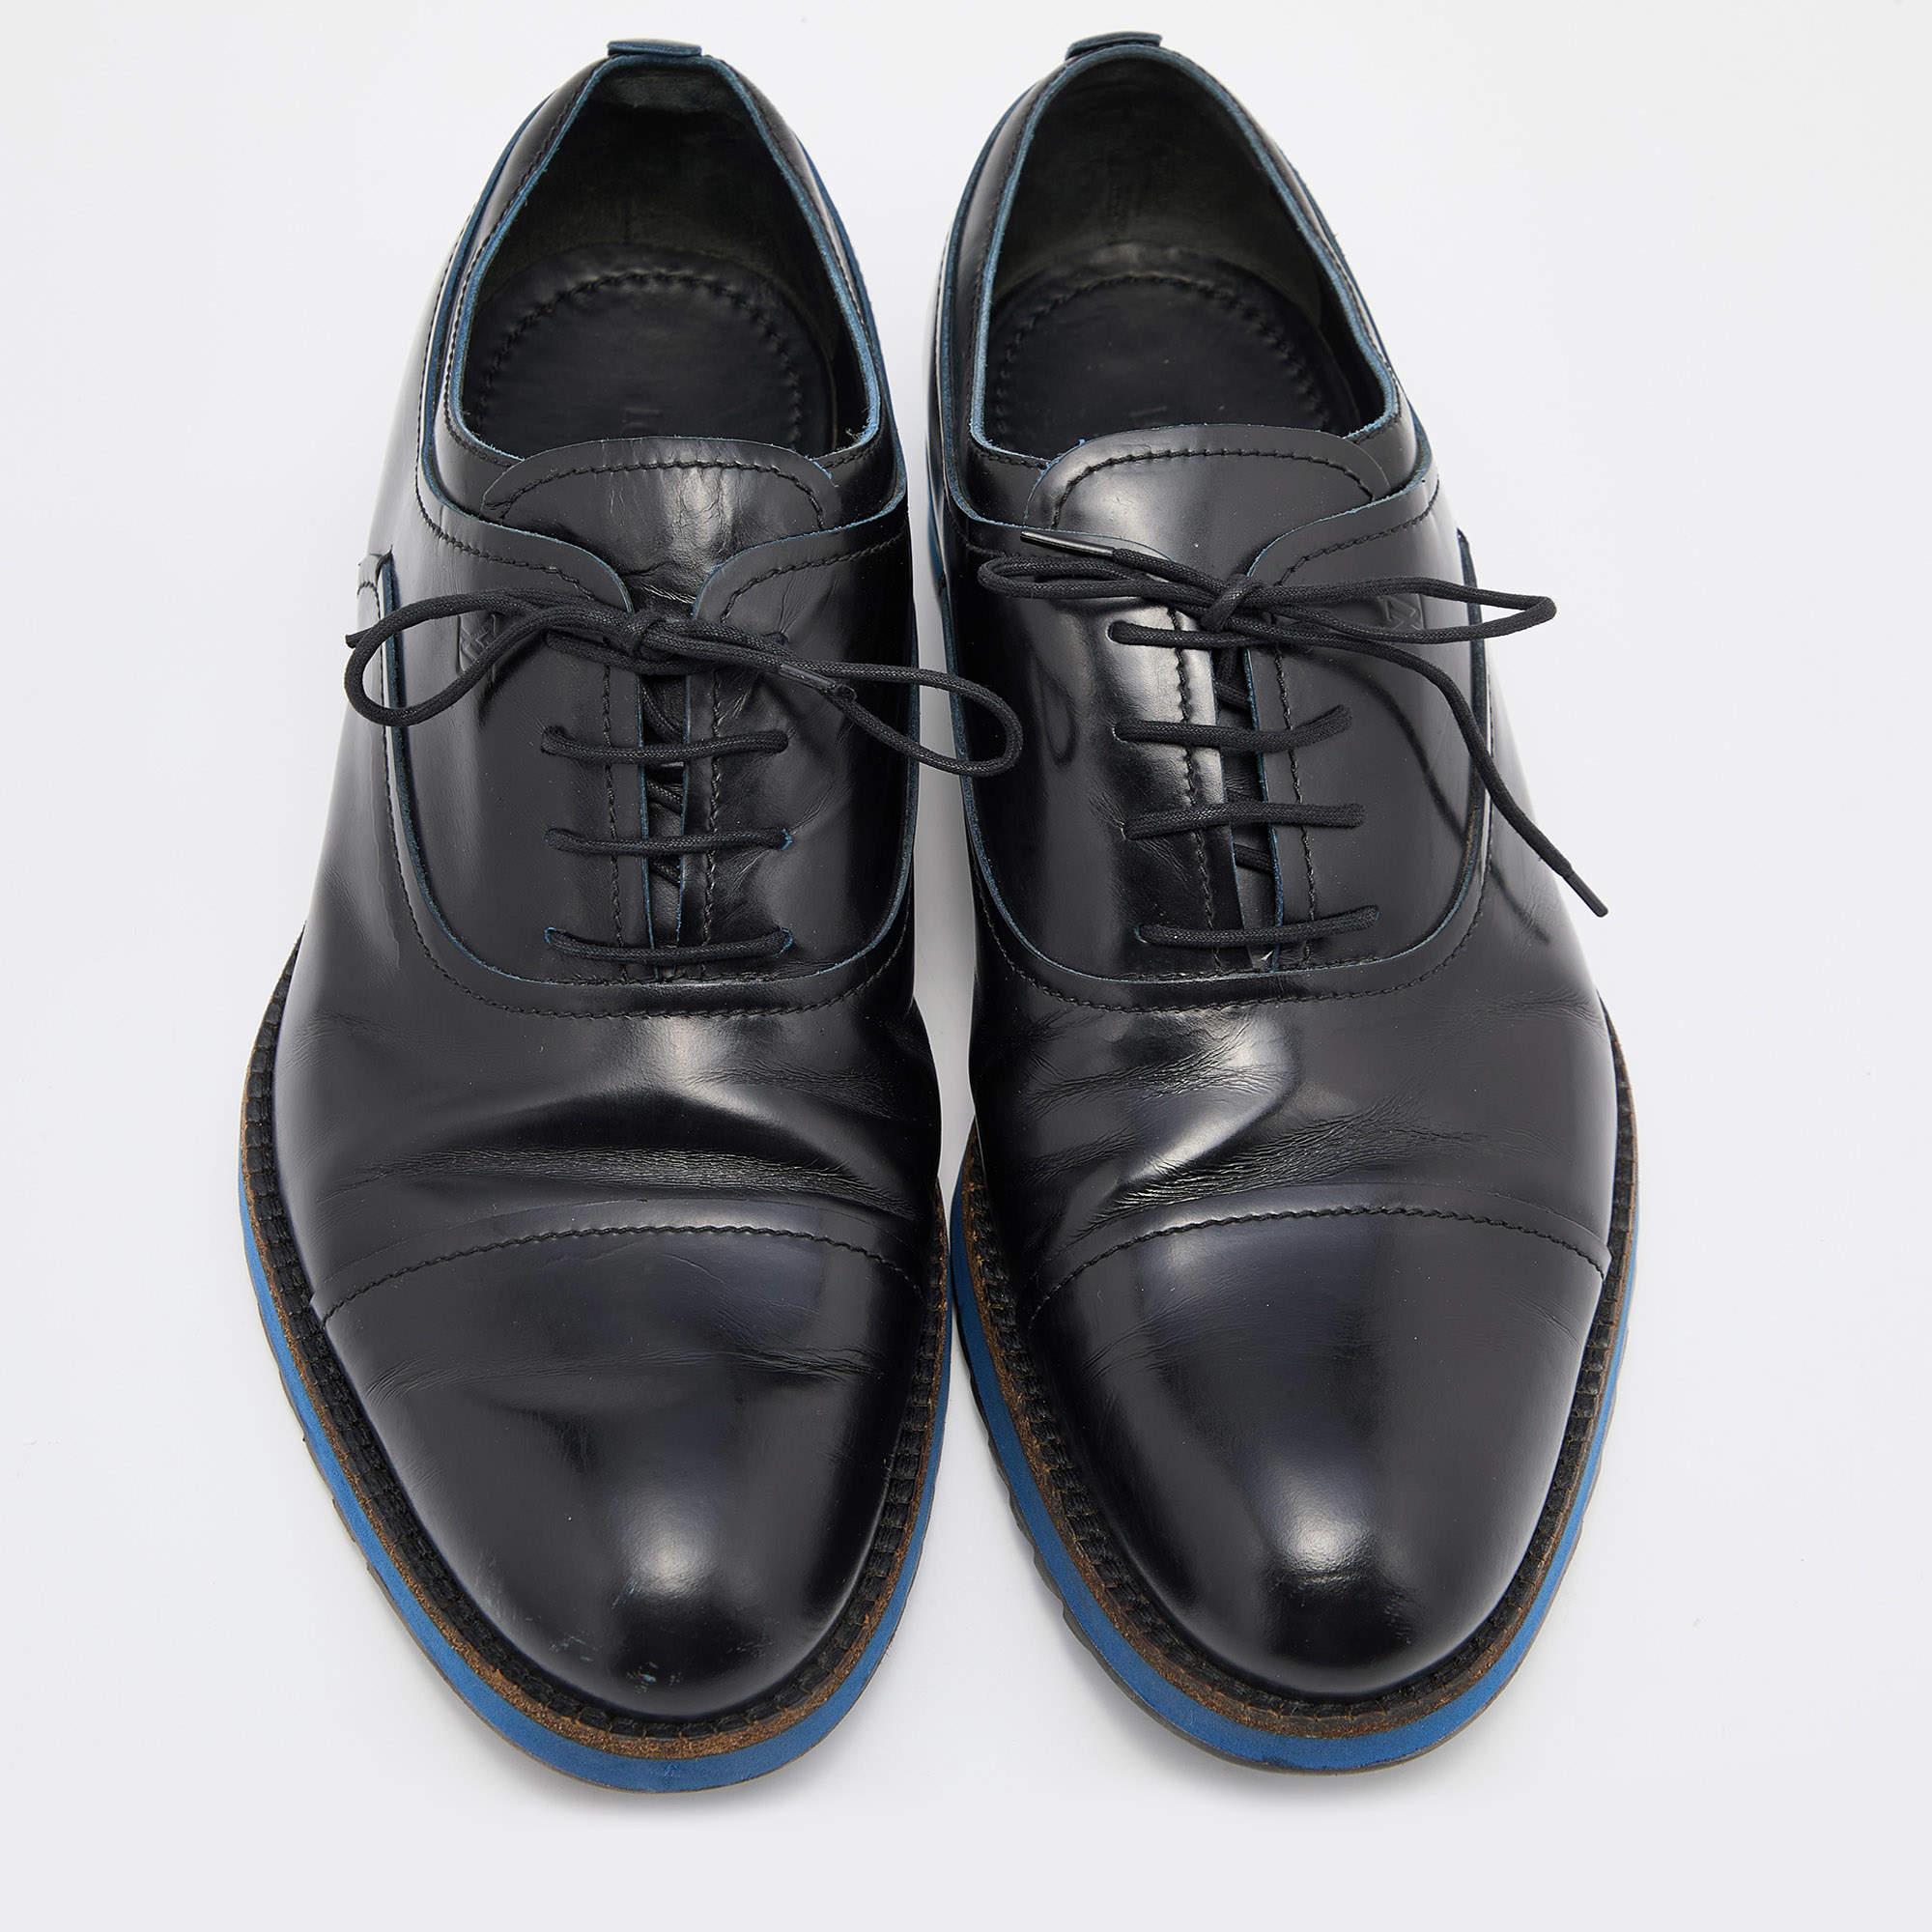 Let this comfortable pair be your first choice when you're out for a long day. These Louis Vuitton oxfords for men have well-sewn uppers beautifully set on durable soles.

